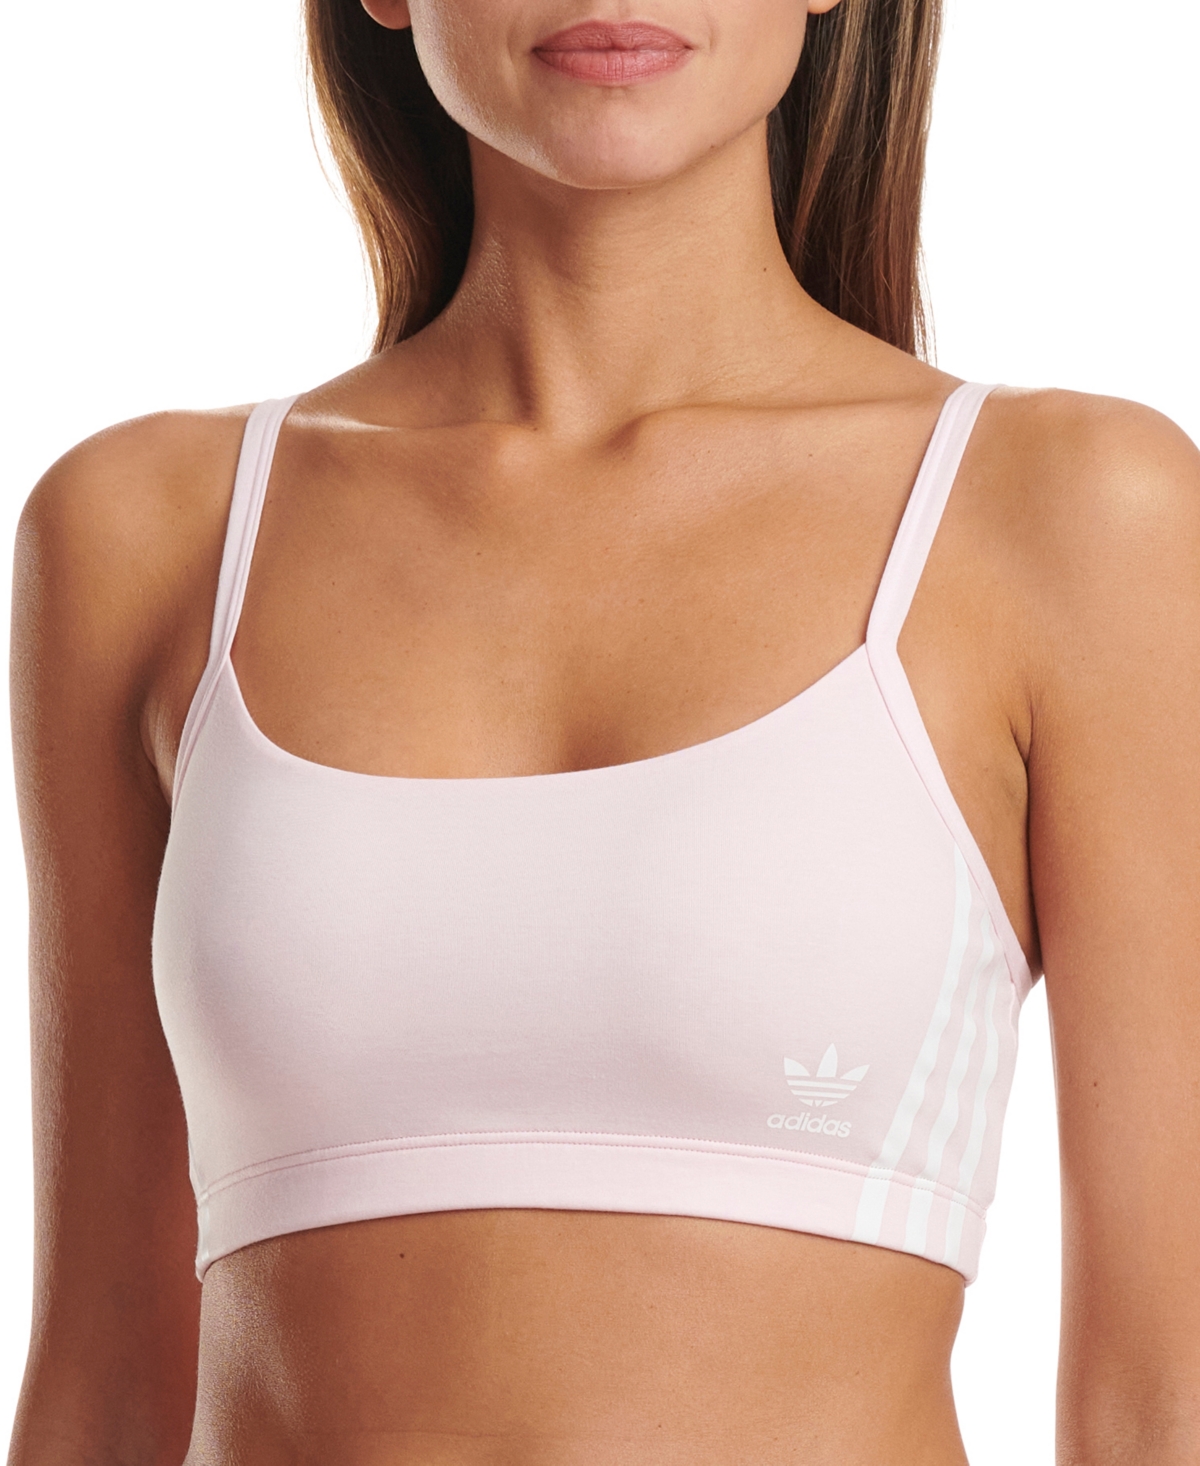 Adidas Originals Intimates Women's 3-stripes Scoop Bralette 4a4h00 In Clear Pink